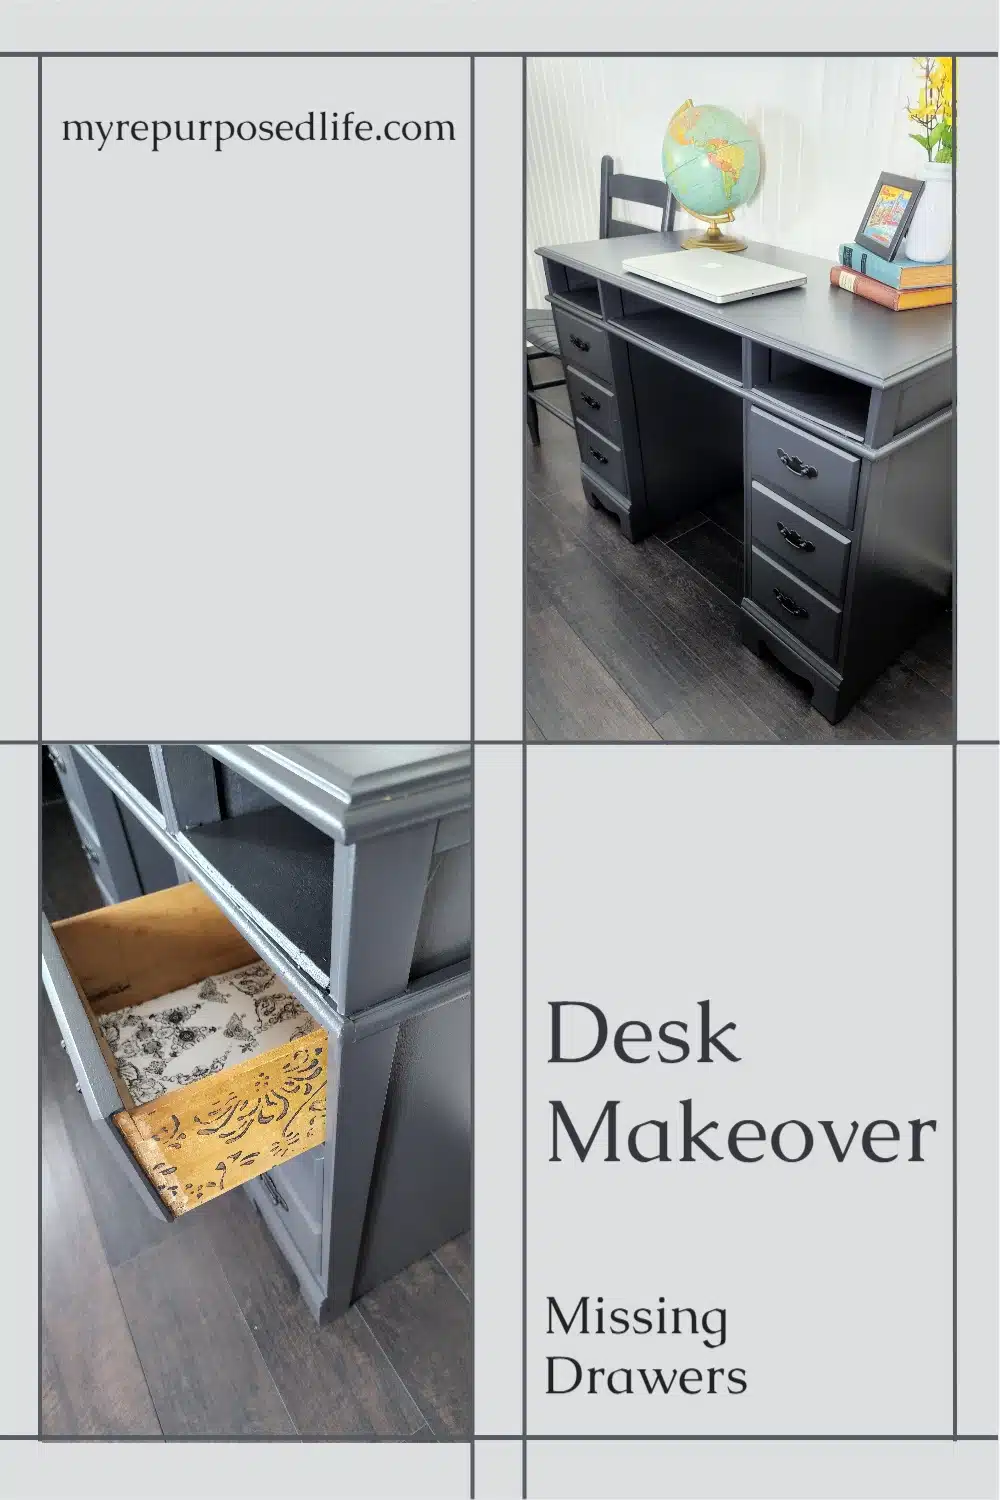 How to makeover a vintage desk with missing drawers. Tips for adding shelves, peek a boo drawers and more. A small desk is perfect for any room in the house. #MyRepurposedLife #desk #makeover #upcycle #missingdrawers #allinonepaint via @repurposedlife